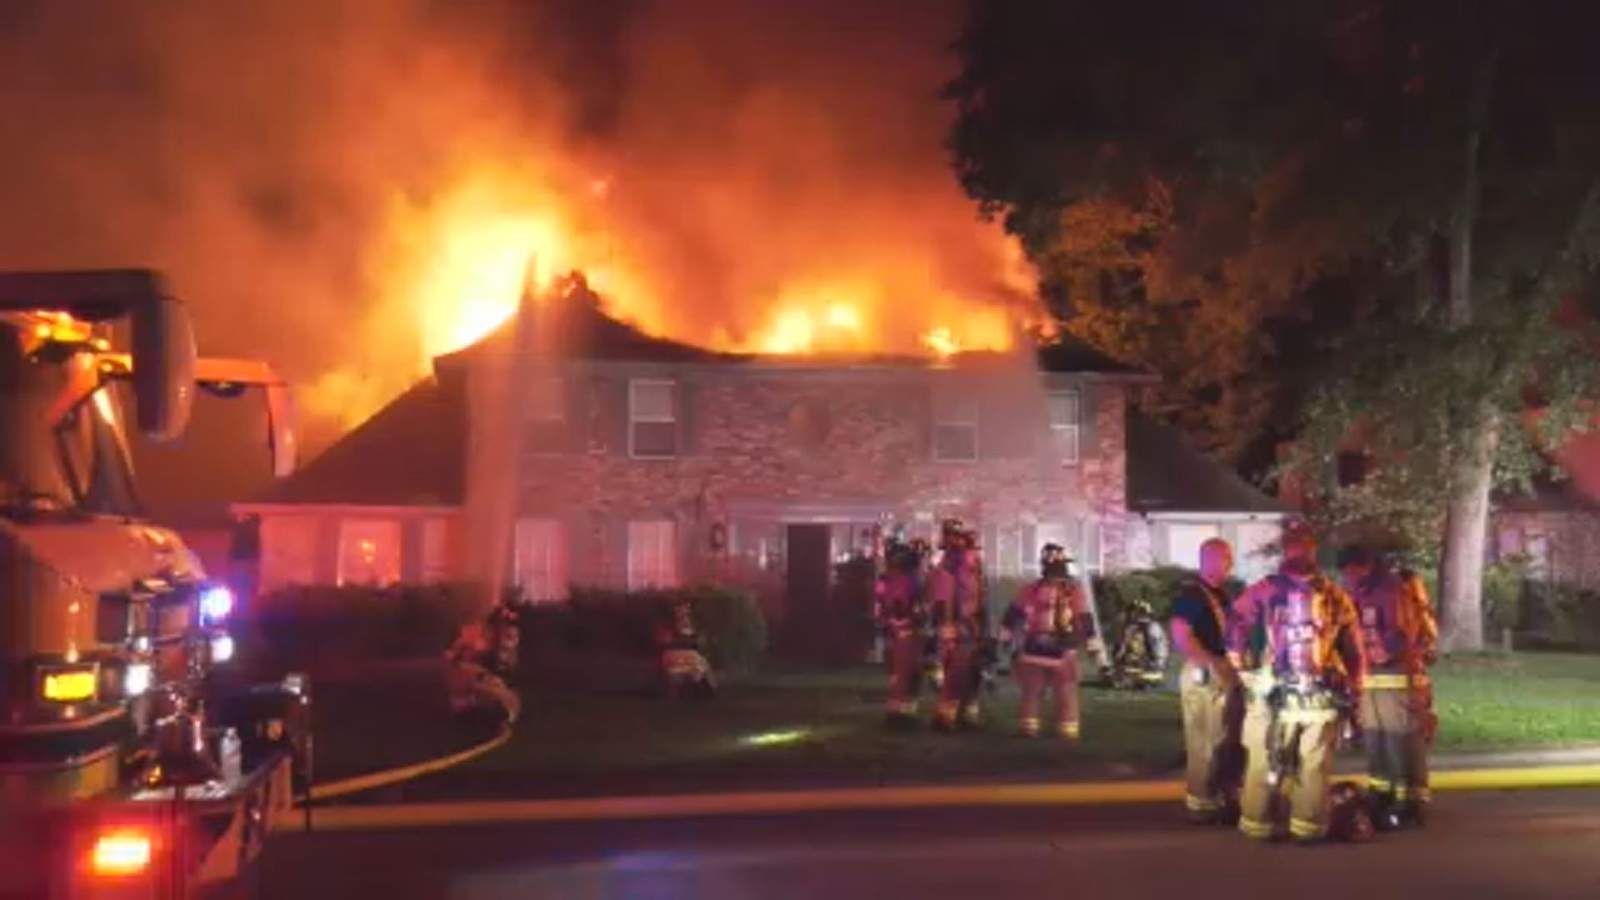 Roof collapses during fire at 2-story home in Spring, officials say